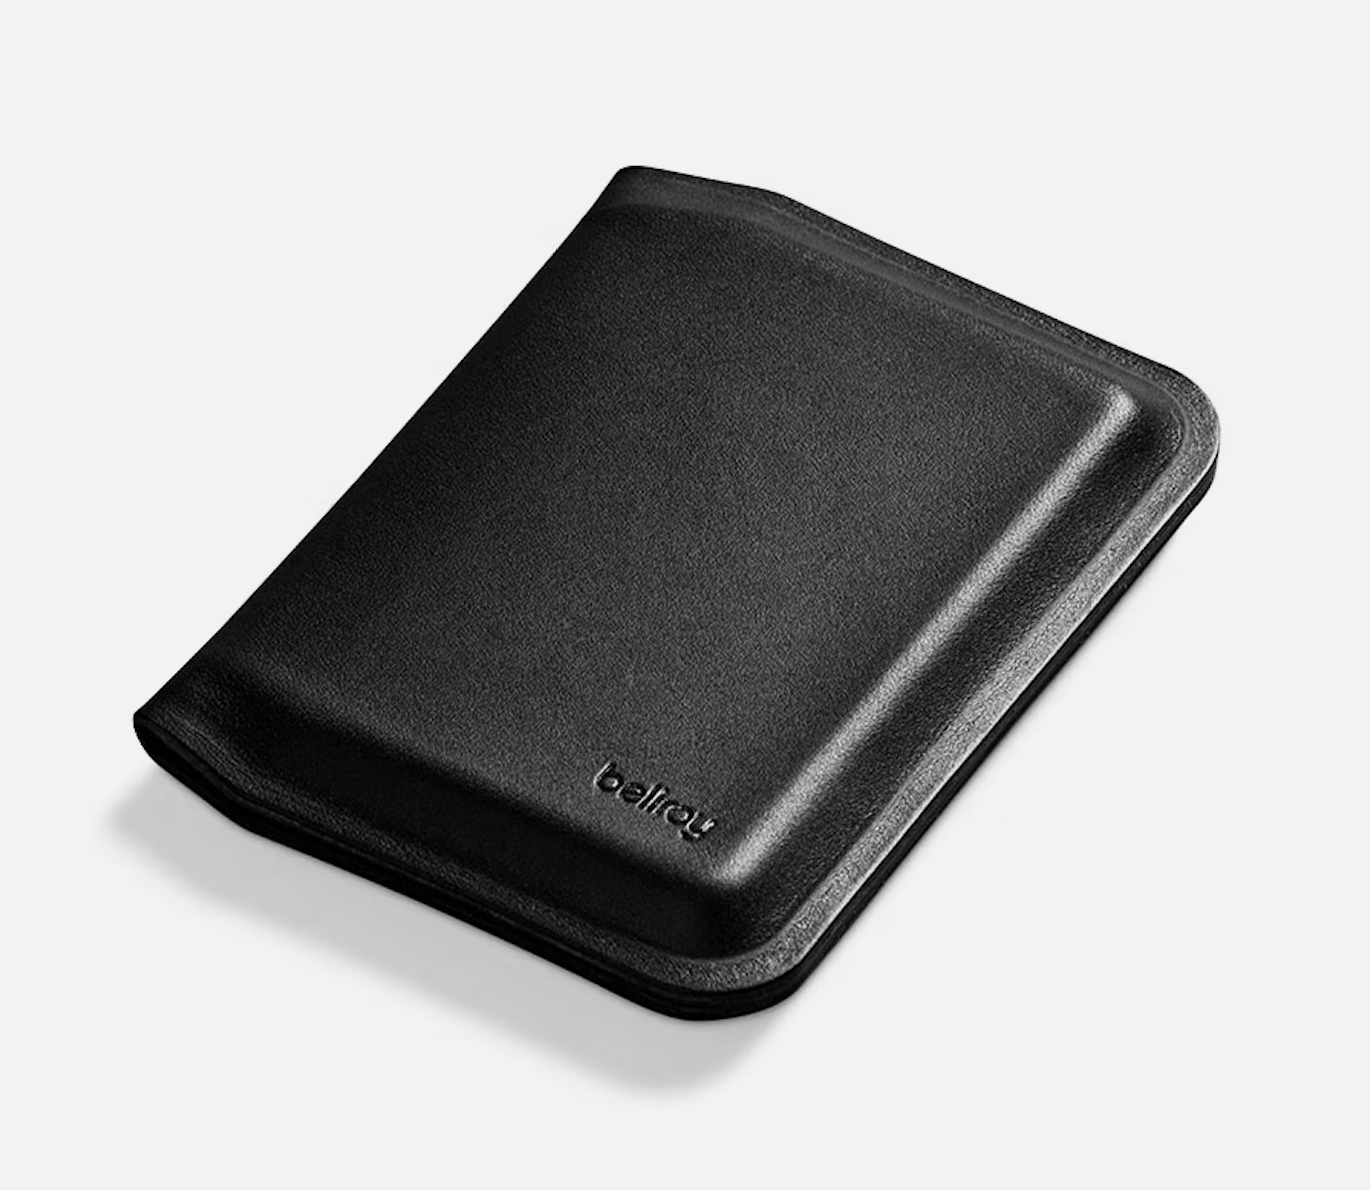 Christmas Gift Guide 2022 I The Minimalist - Bellroy Apex Slim Sleeve Wallet